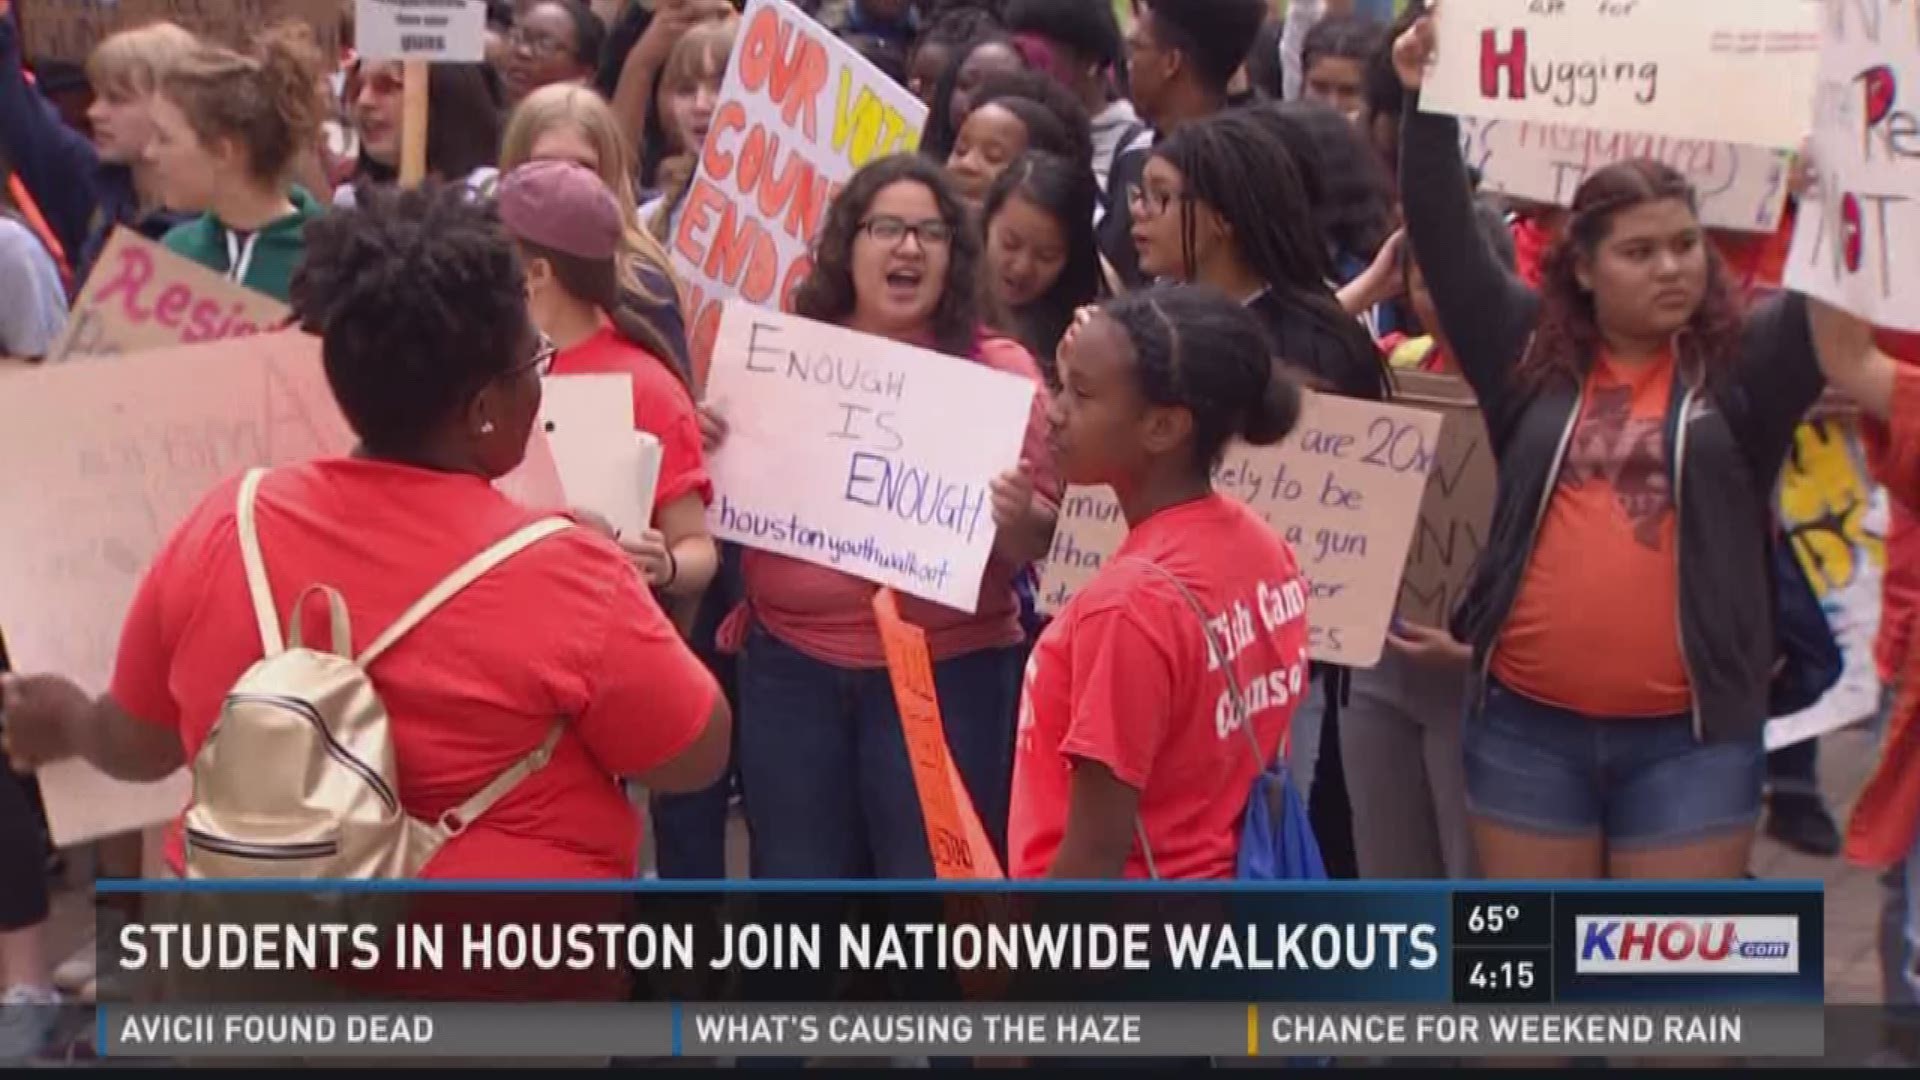 Students protested peacefully in Houston on Friday calling for more gun control in the wake of recent school shootings and to honor the anniversary of the Columbine shooting.